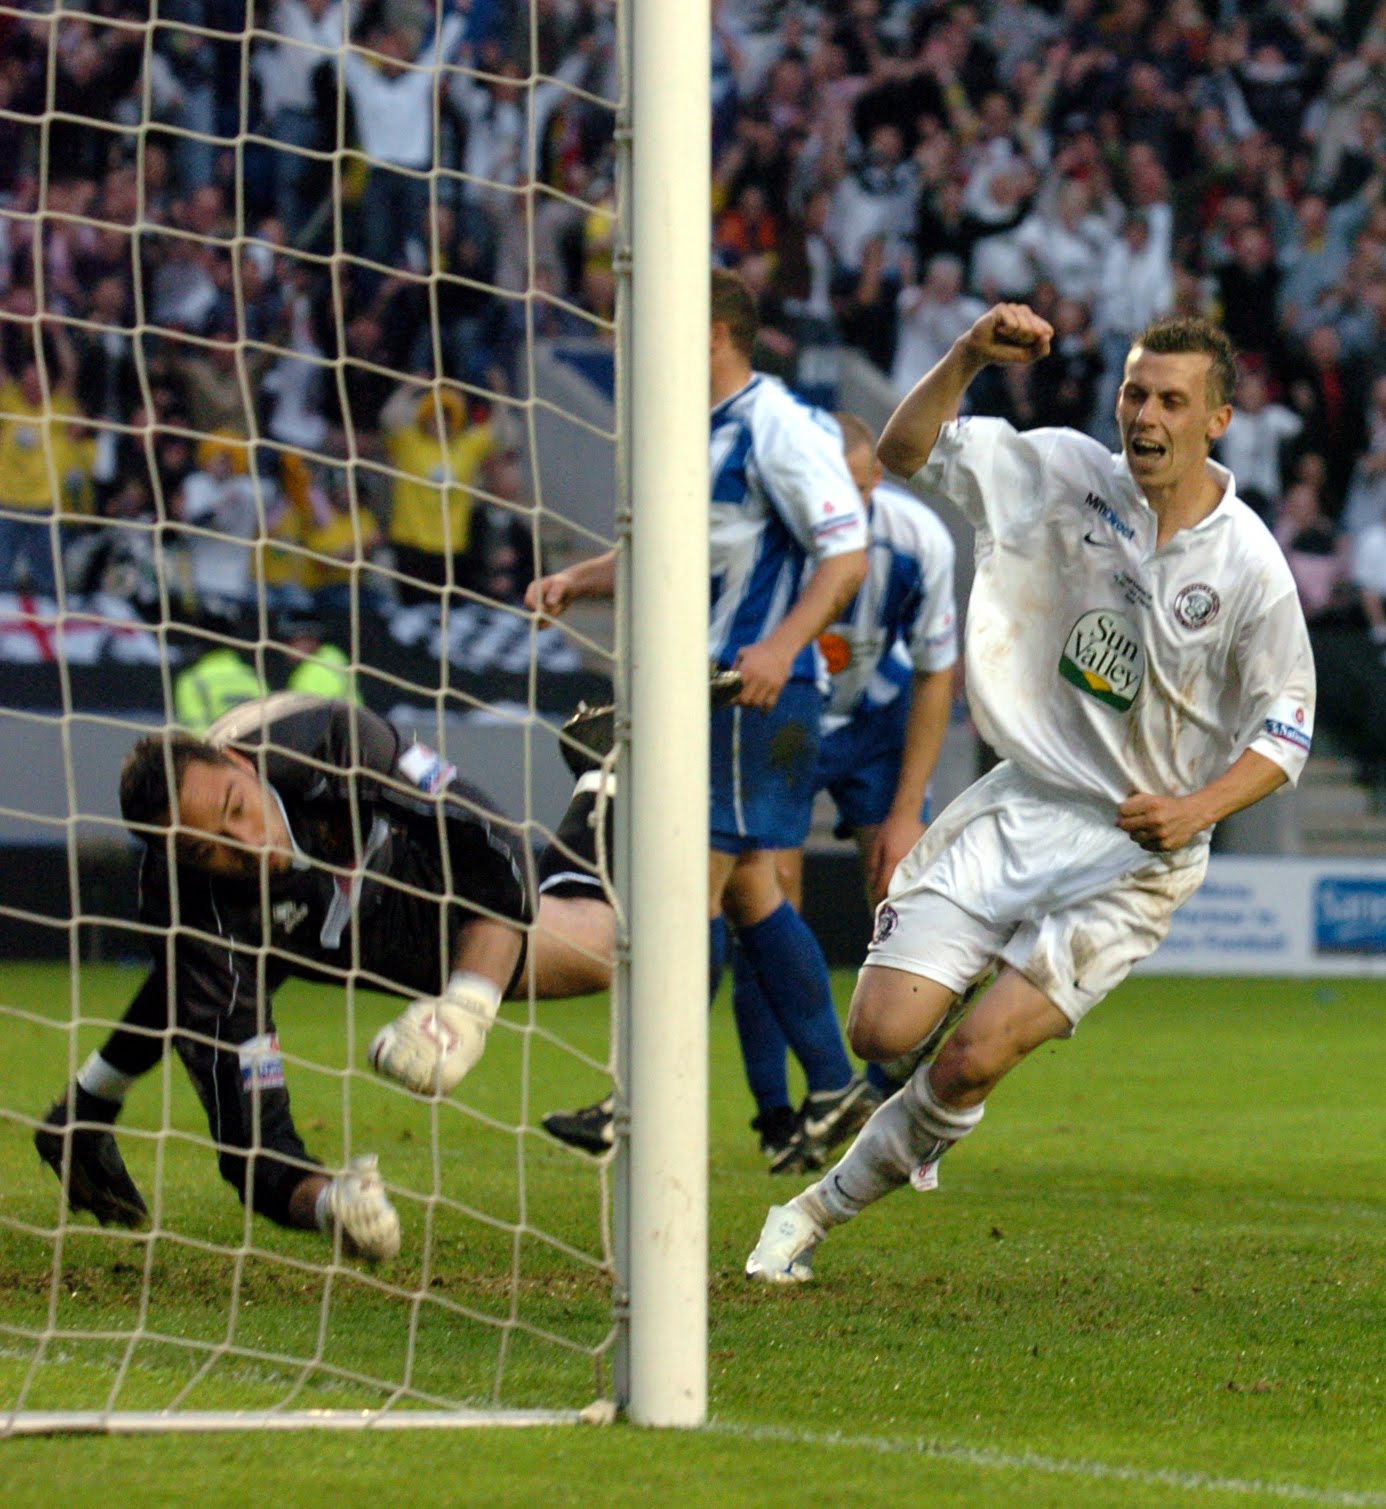 20th May 2006 | Hereford United reach the Football League